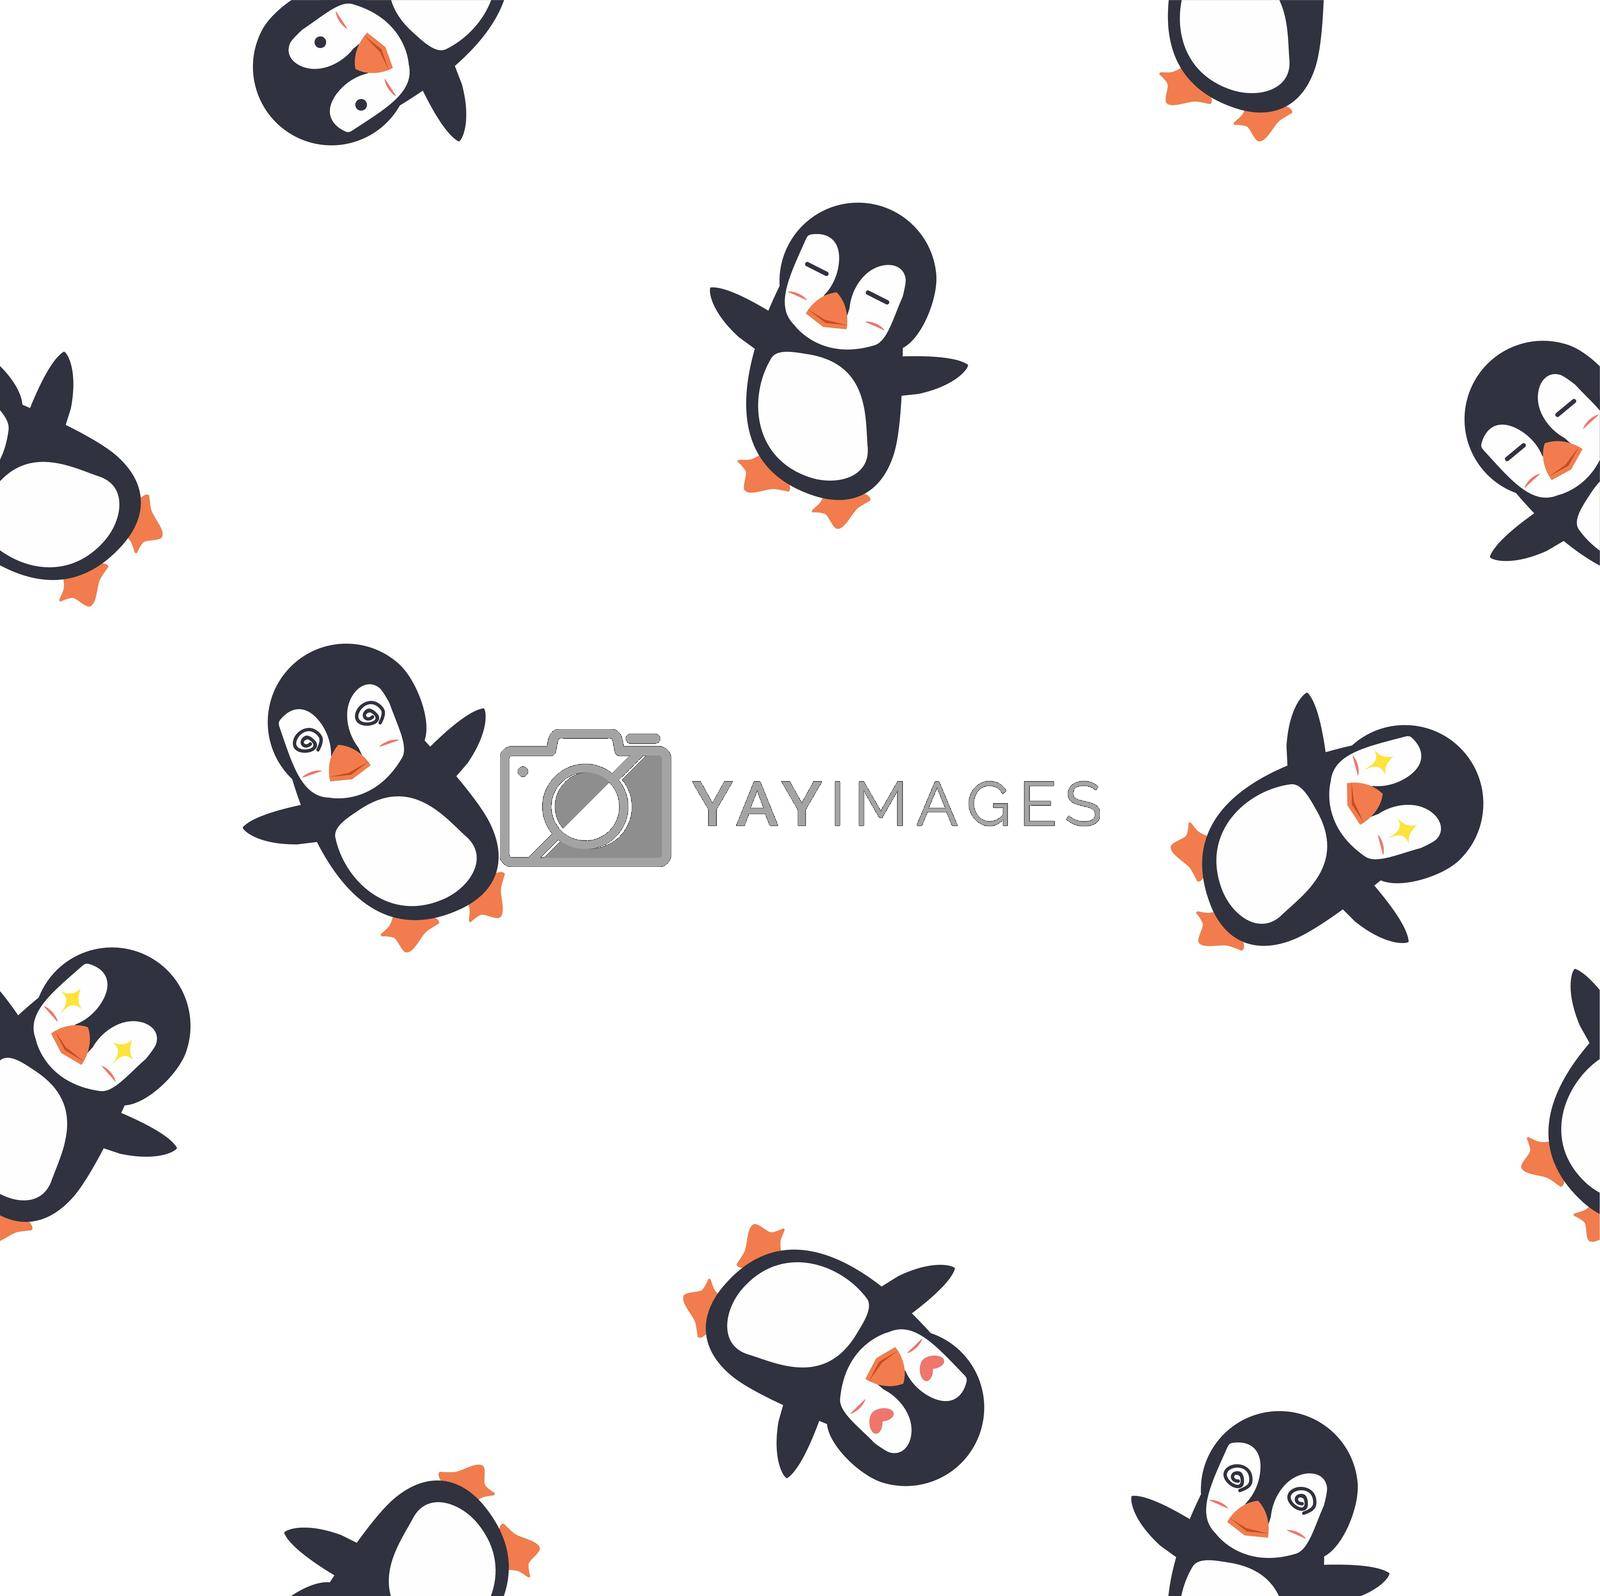 Royalty free image of penguin emotion face seamless pattern by focus_bell